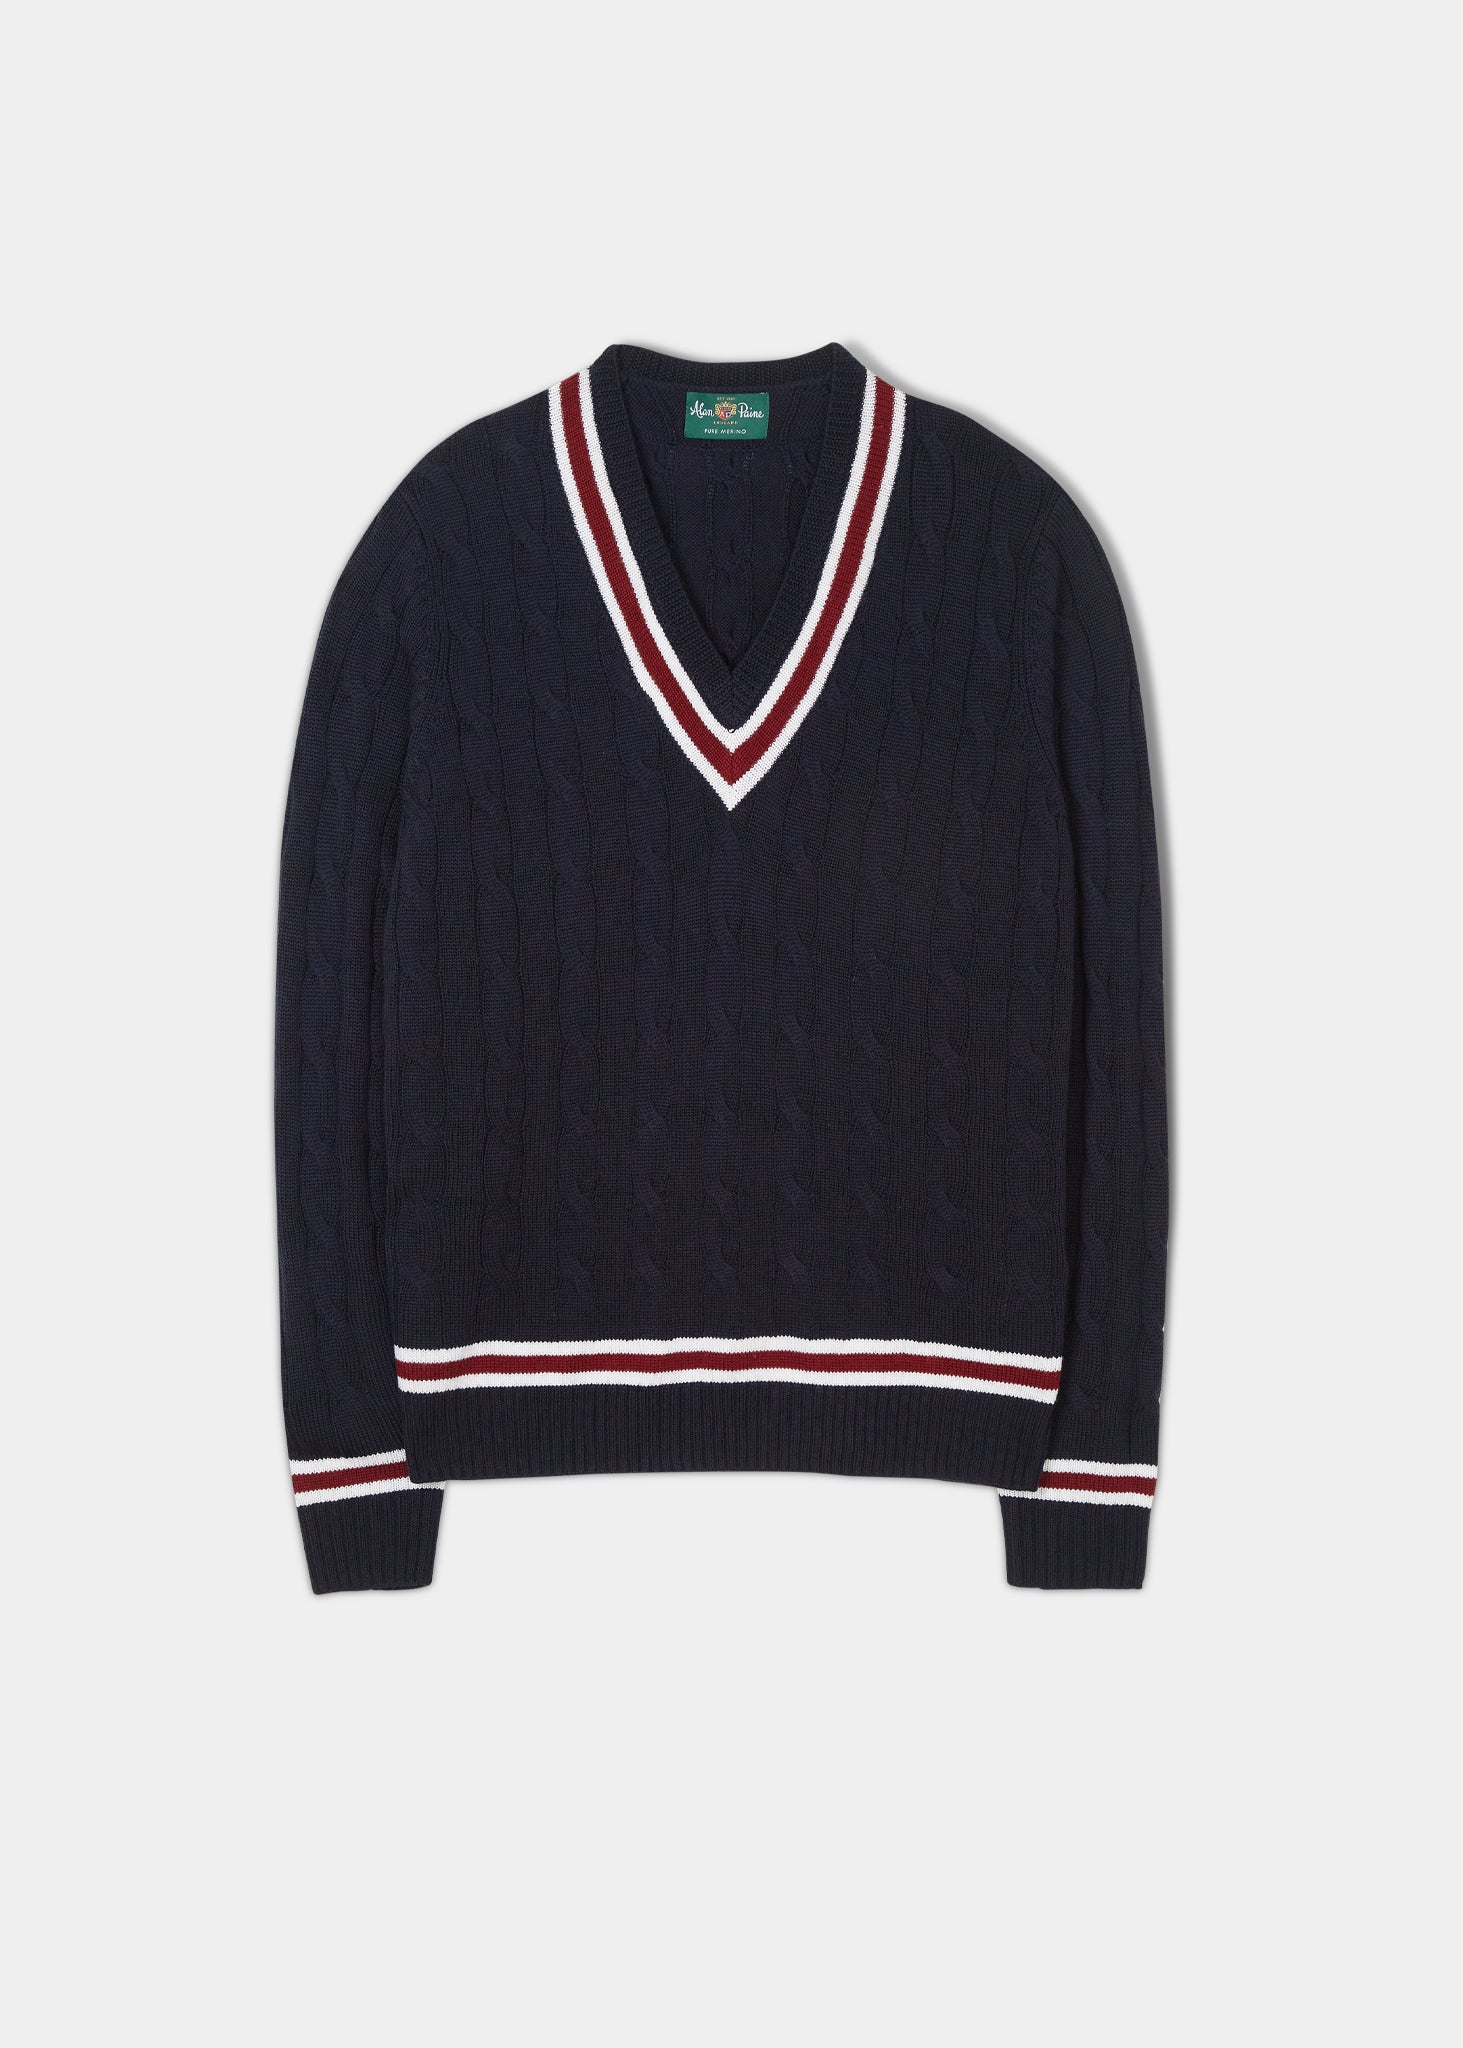 Men's Merino Wool Cable Cricket Jumpe in Dark Navy With Ecru And Bordeaux Trim